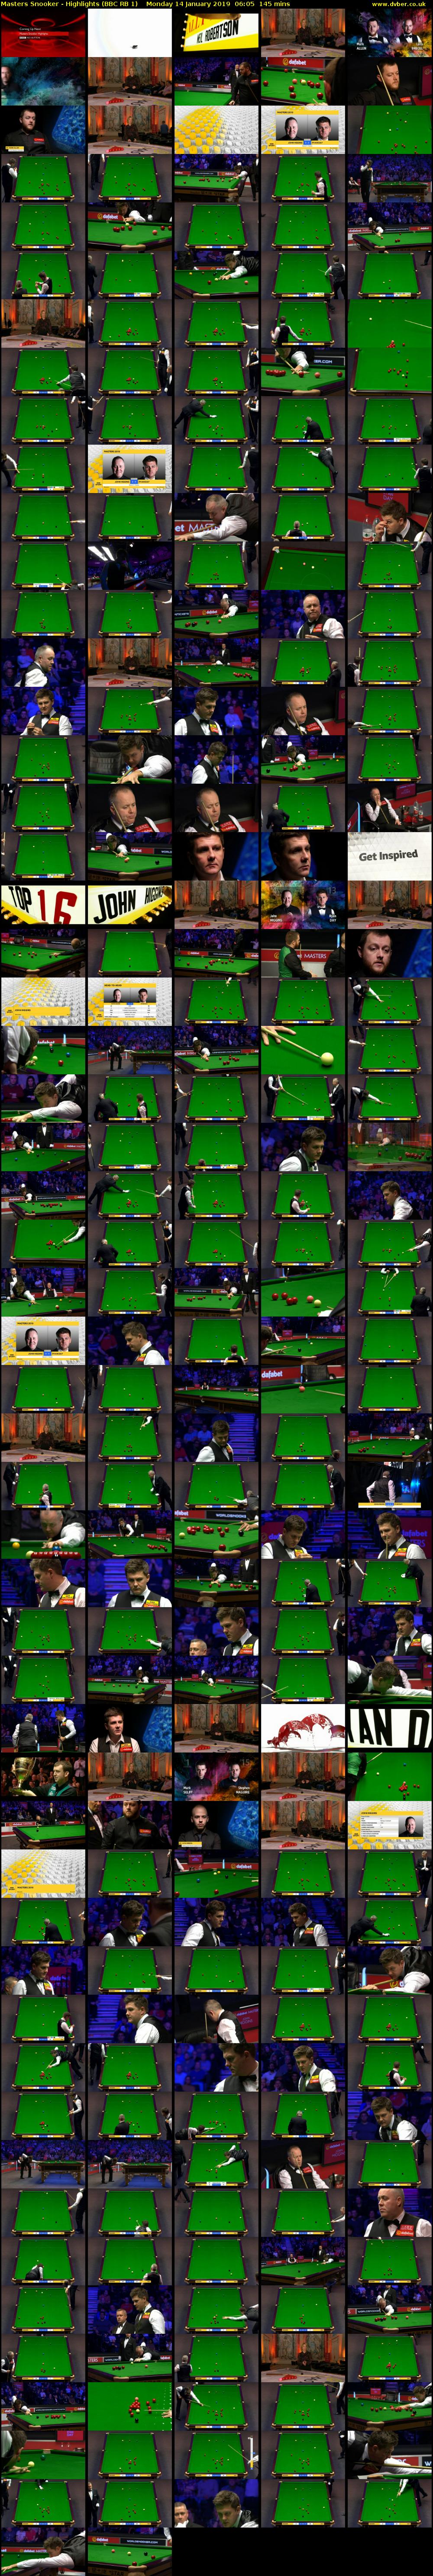 Masters Snooker - Highlights (BBC RB 1) Monday 14 January 2019 06:05 - 08:30